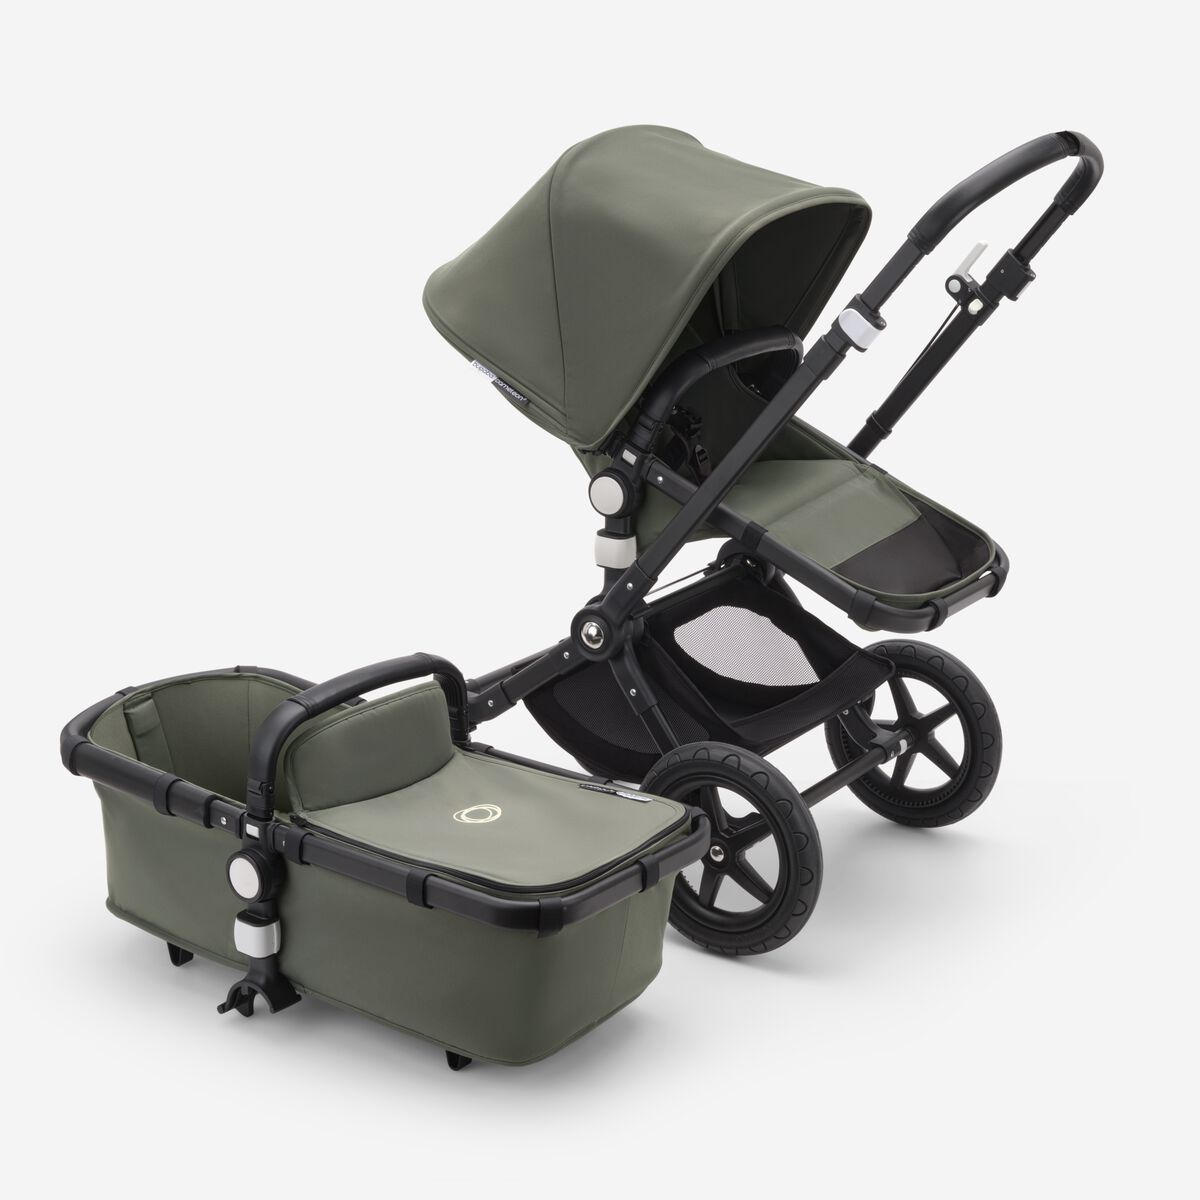 117050bugaboo-cameleon3-plus-black-forest-green-x-s002139015-01